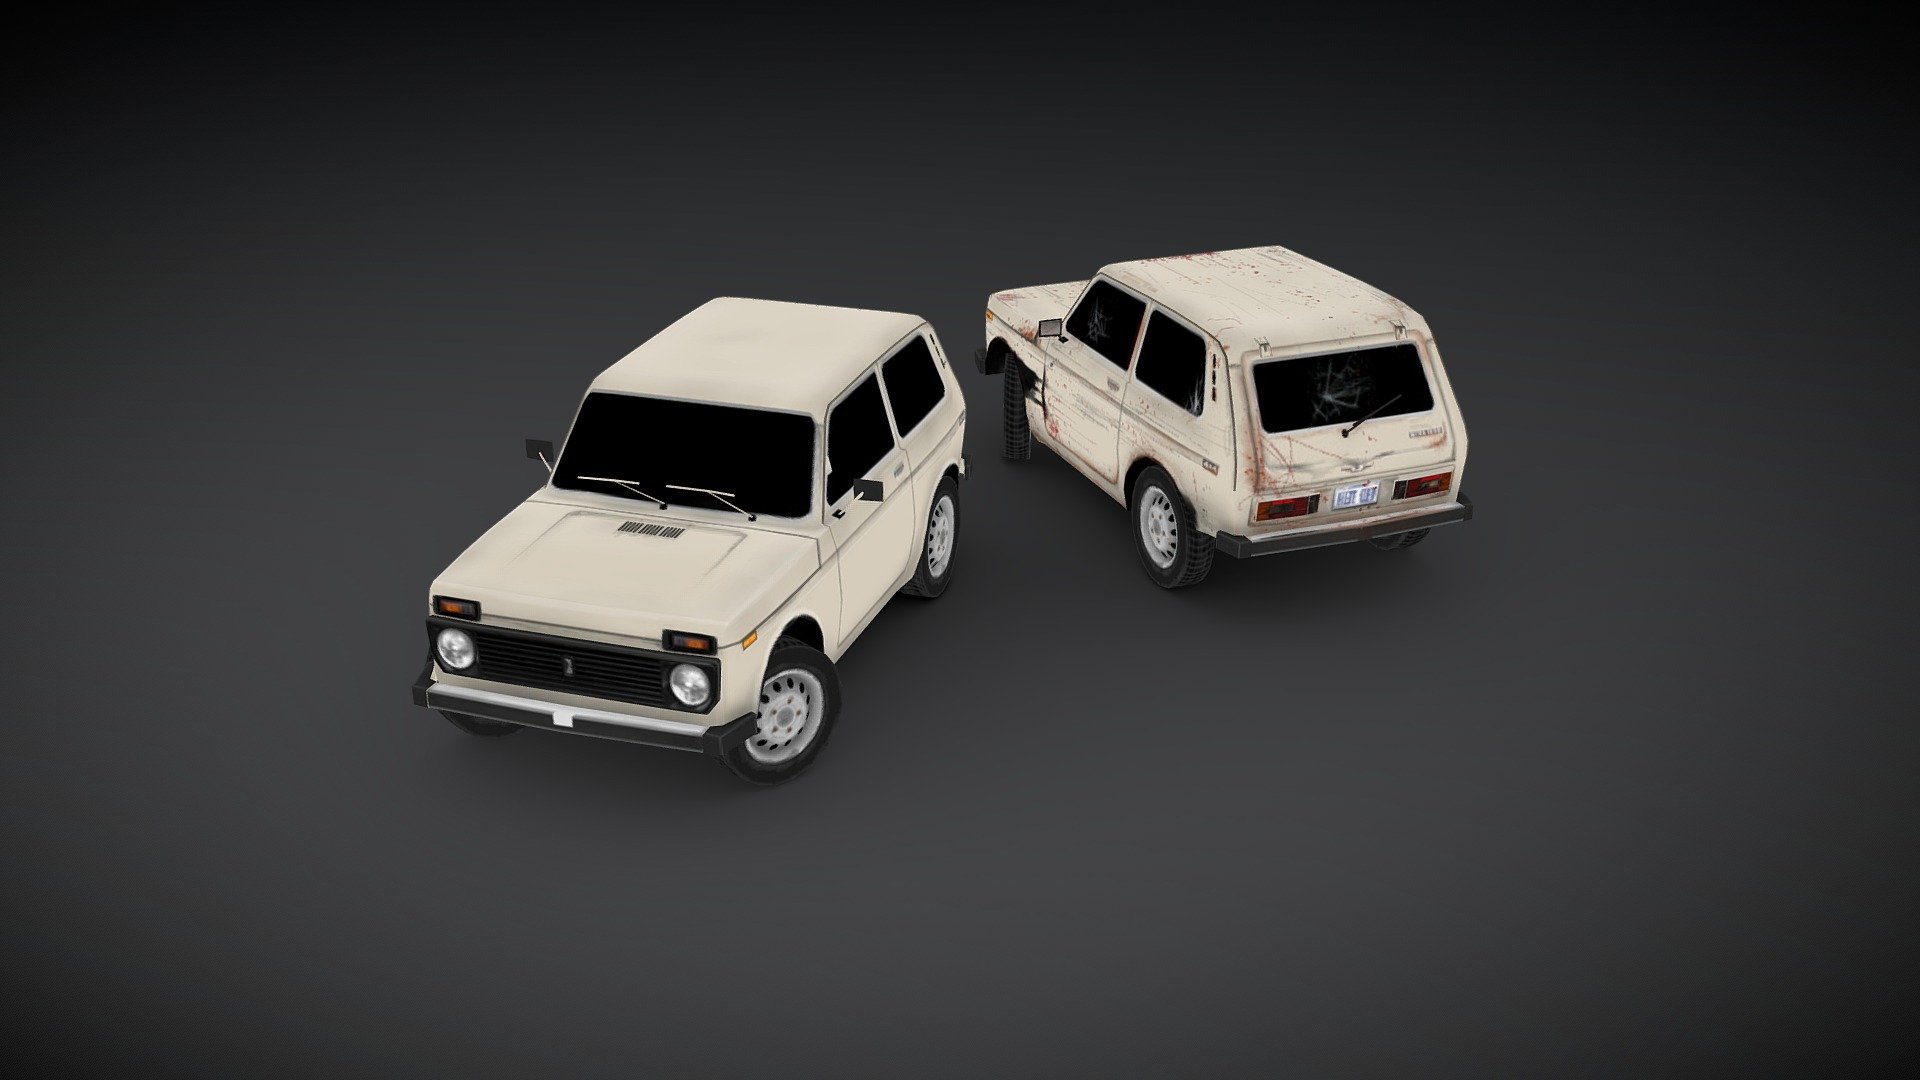 Another showcase of a 1990 Lada Niva I’ve made for project ZOMBOID, low poly but with a high detail texture, optimized for game engine. This version is not a 100% true to the original since there are some compromises I’ve had to make to present it here.

You can find the actual version in project ZOMBOID STEAM Workshop 3d model